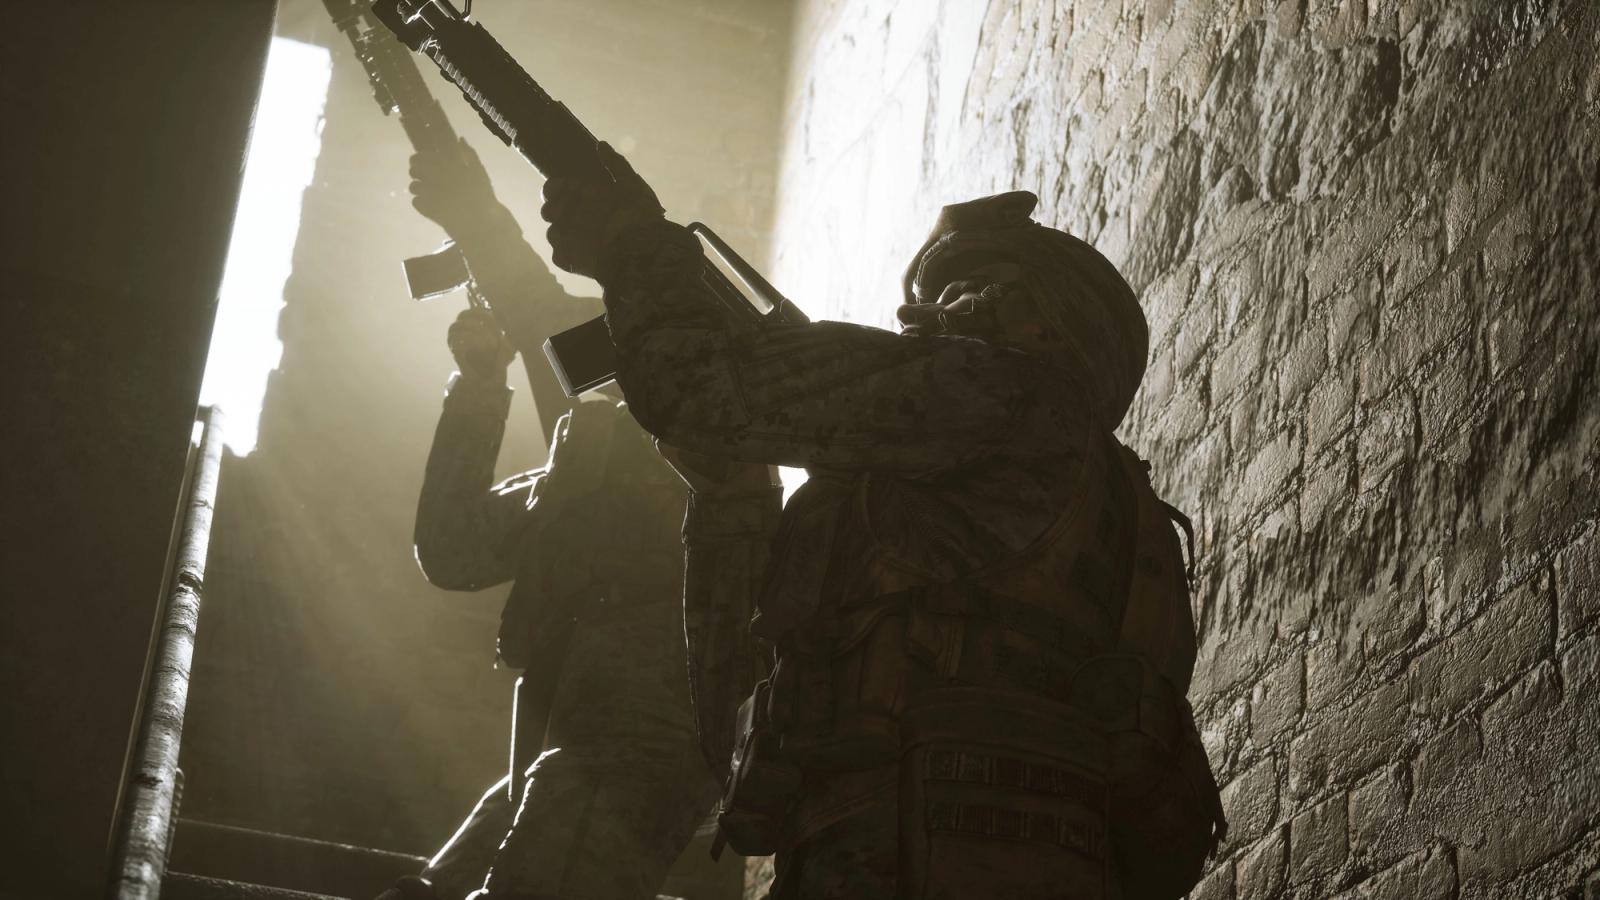 A screenshot from Six Days in Fallujah. Two armed military men are walking upstairs in a basic stone building. Their guns are pointed in unison, anticipating a threat.